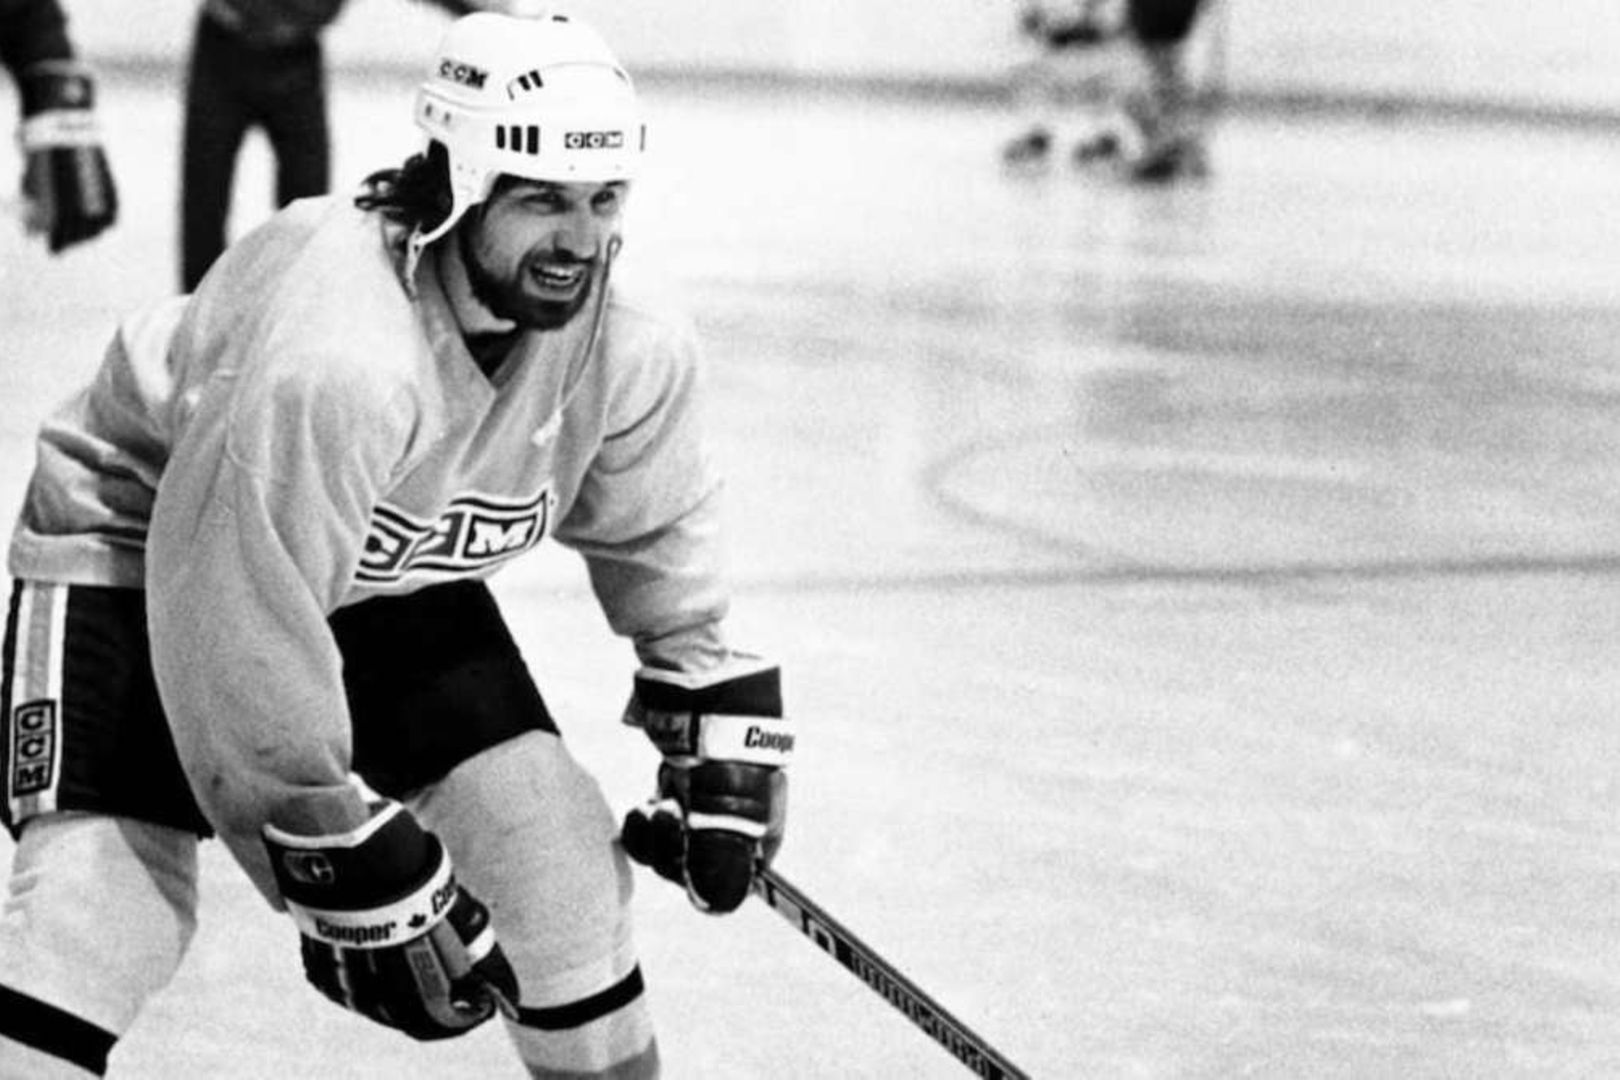 Mark Pavelich, Miracle on Ice Olympic hockey player, dies at 63